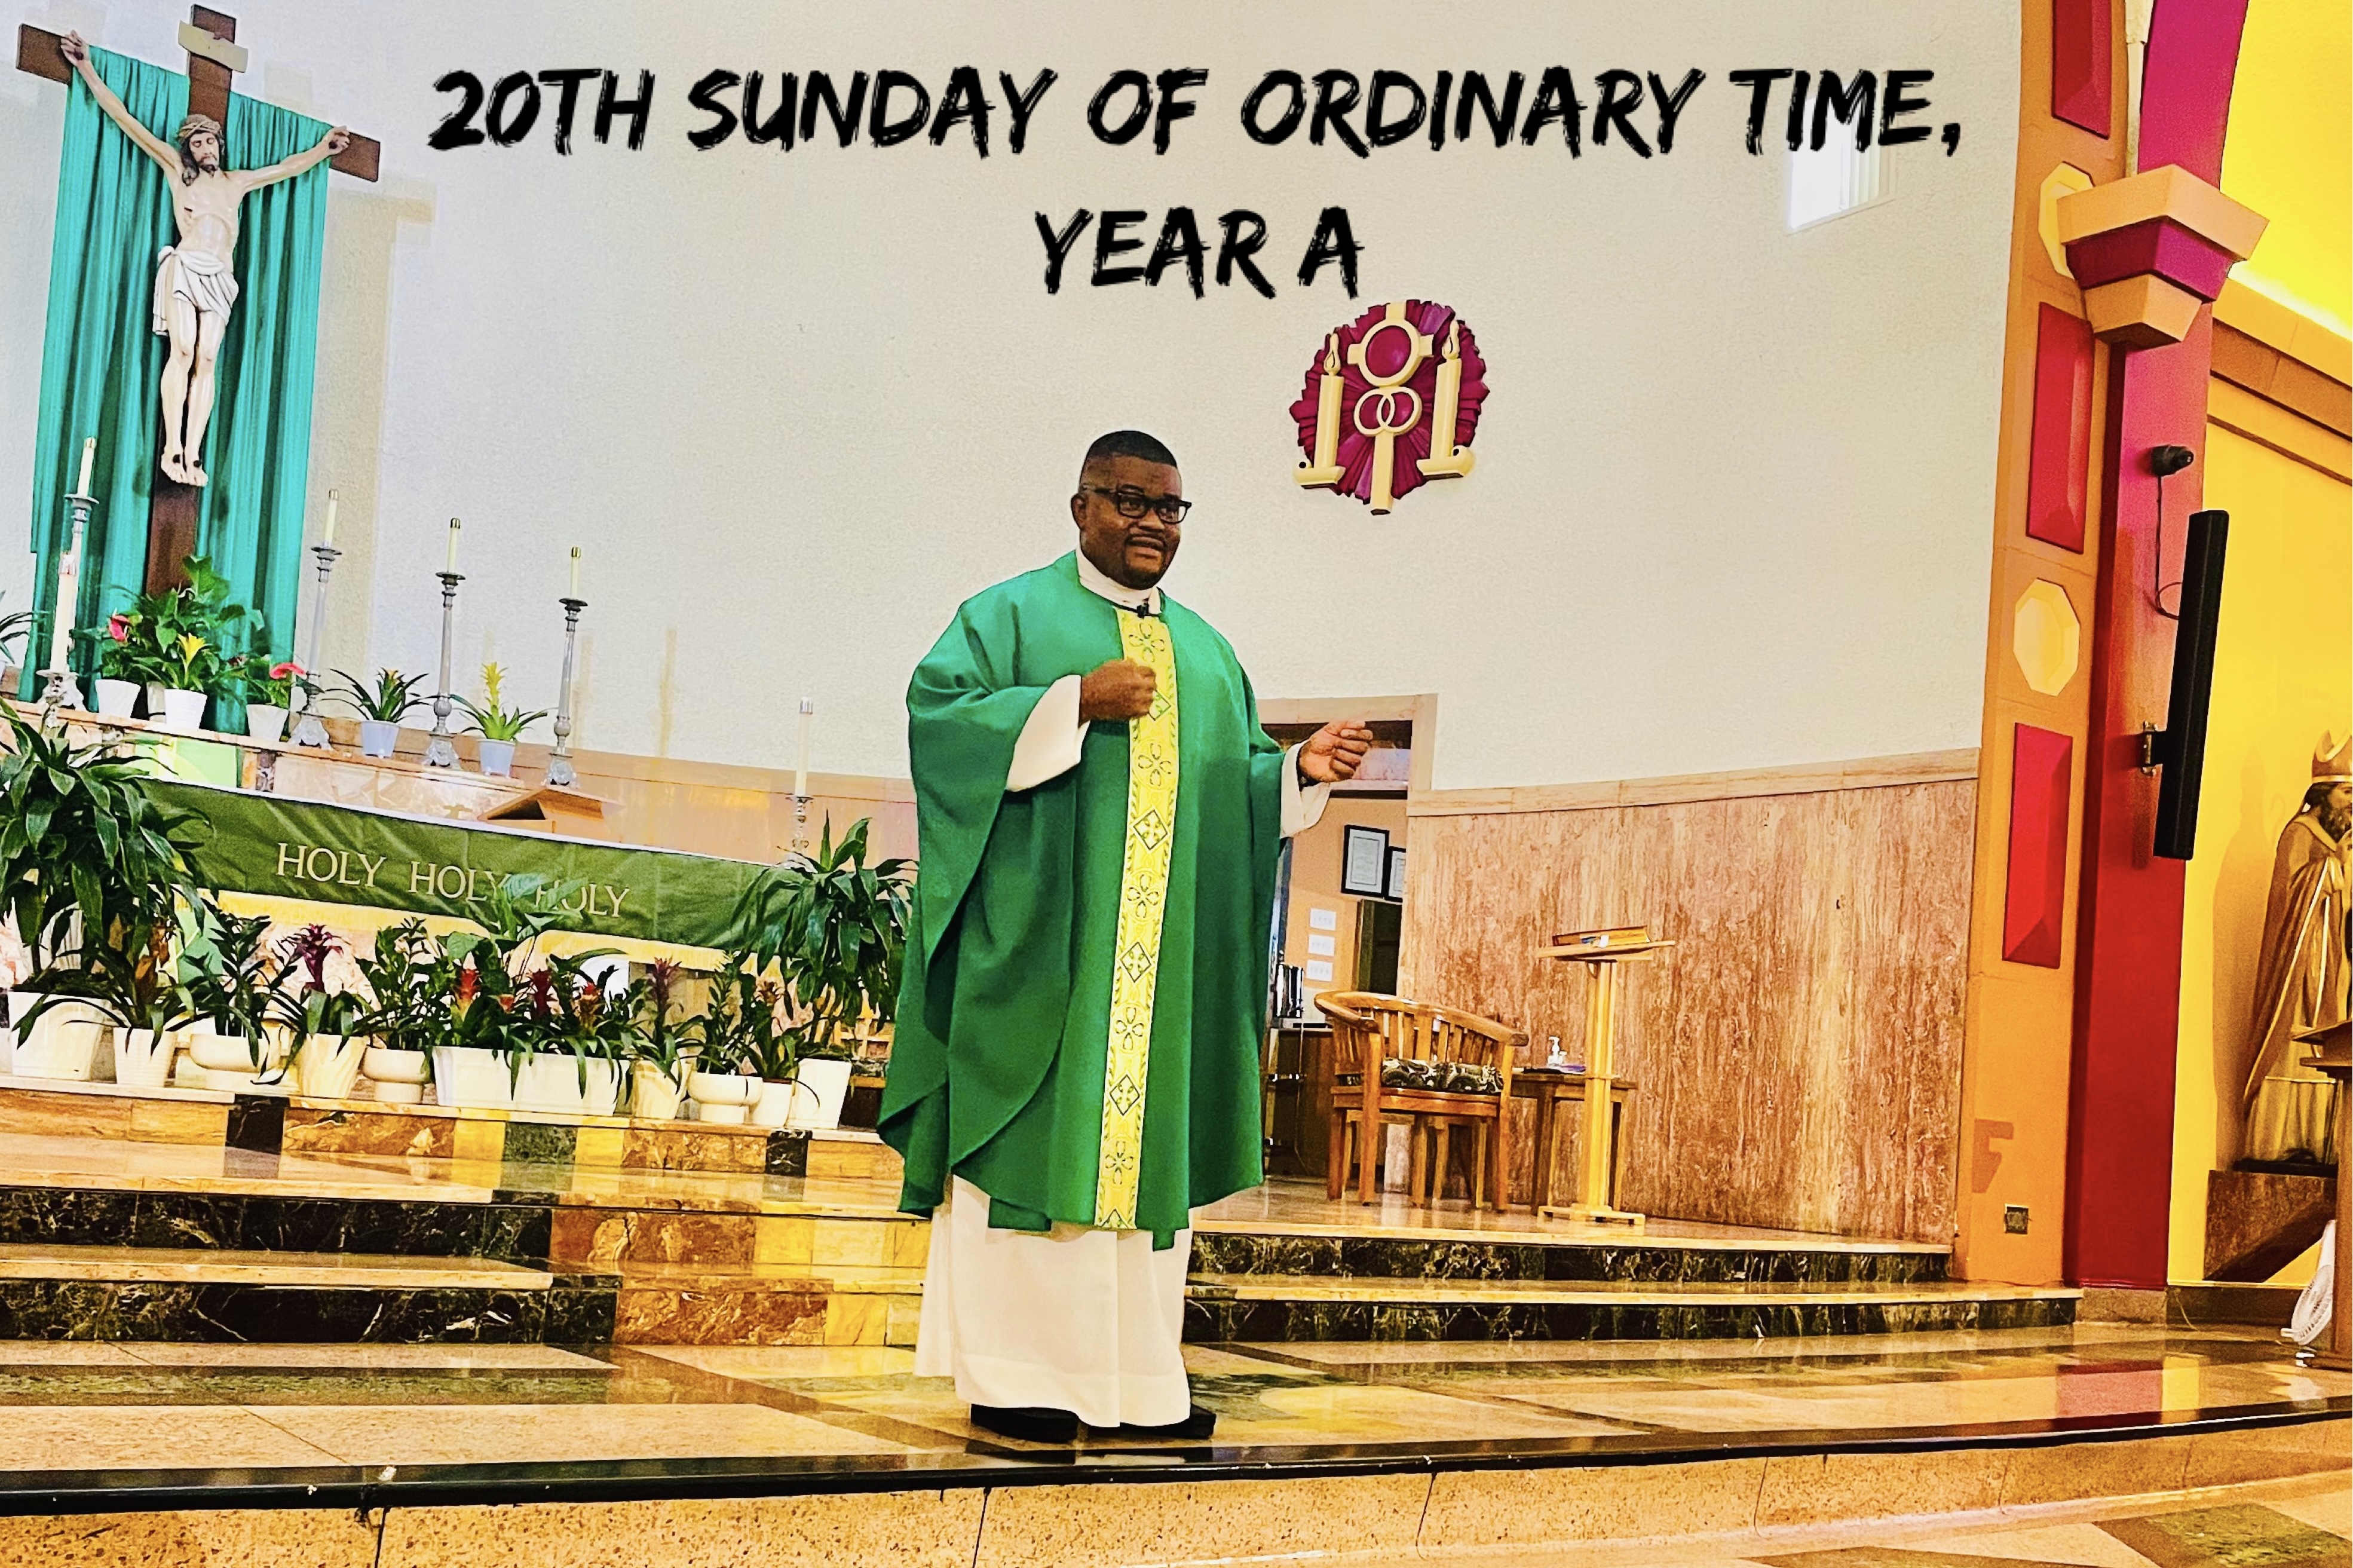 20th Sunday of Ordinary Time, Year A